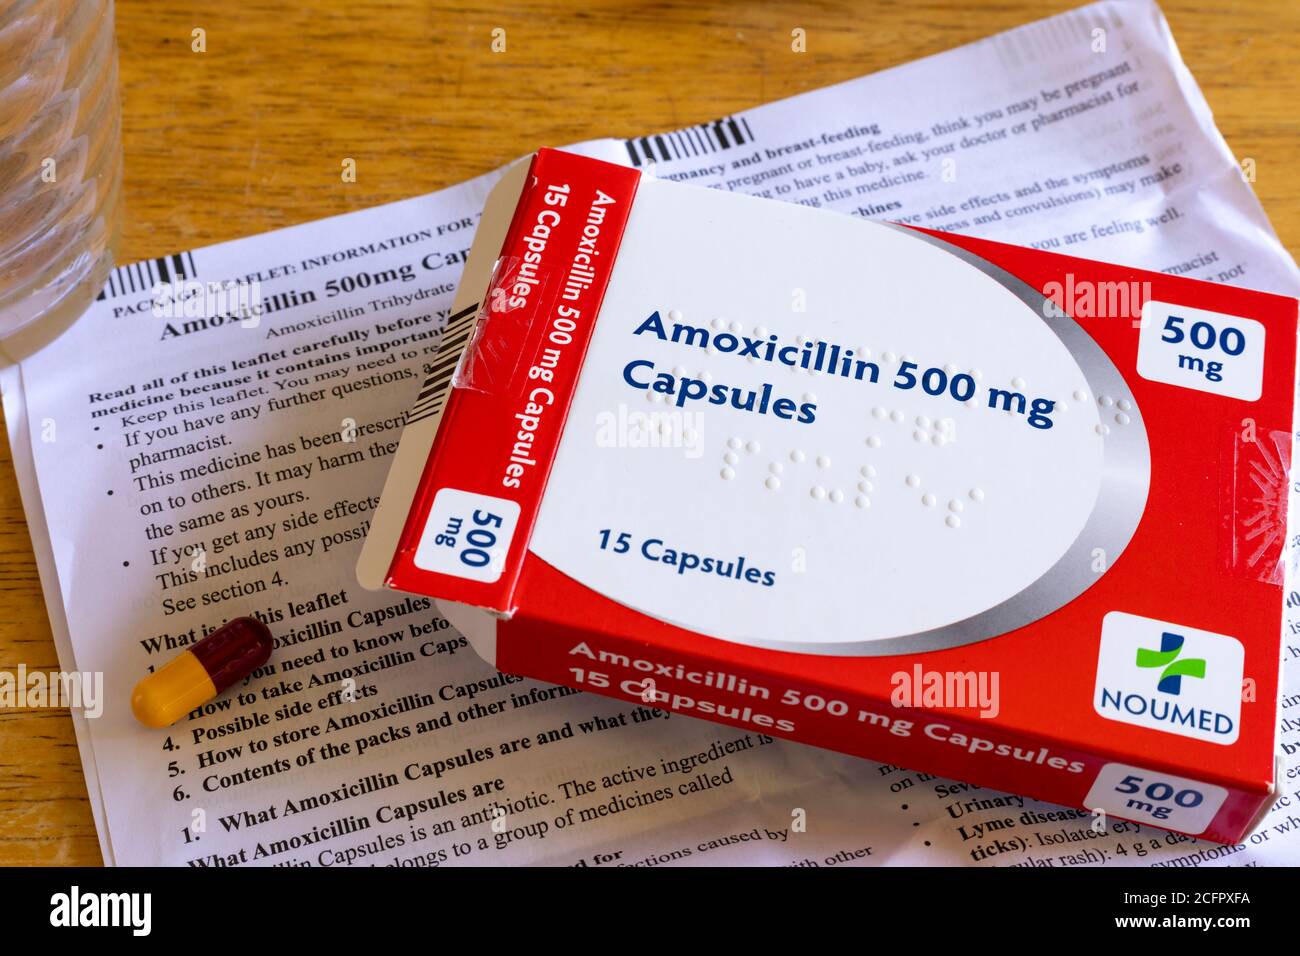 Opened packet of Amoxicillin capsules, a common antibiotic medication used for treating infections Stock Photo